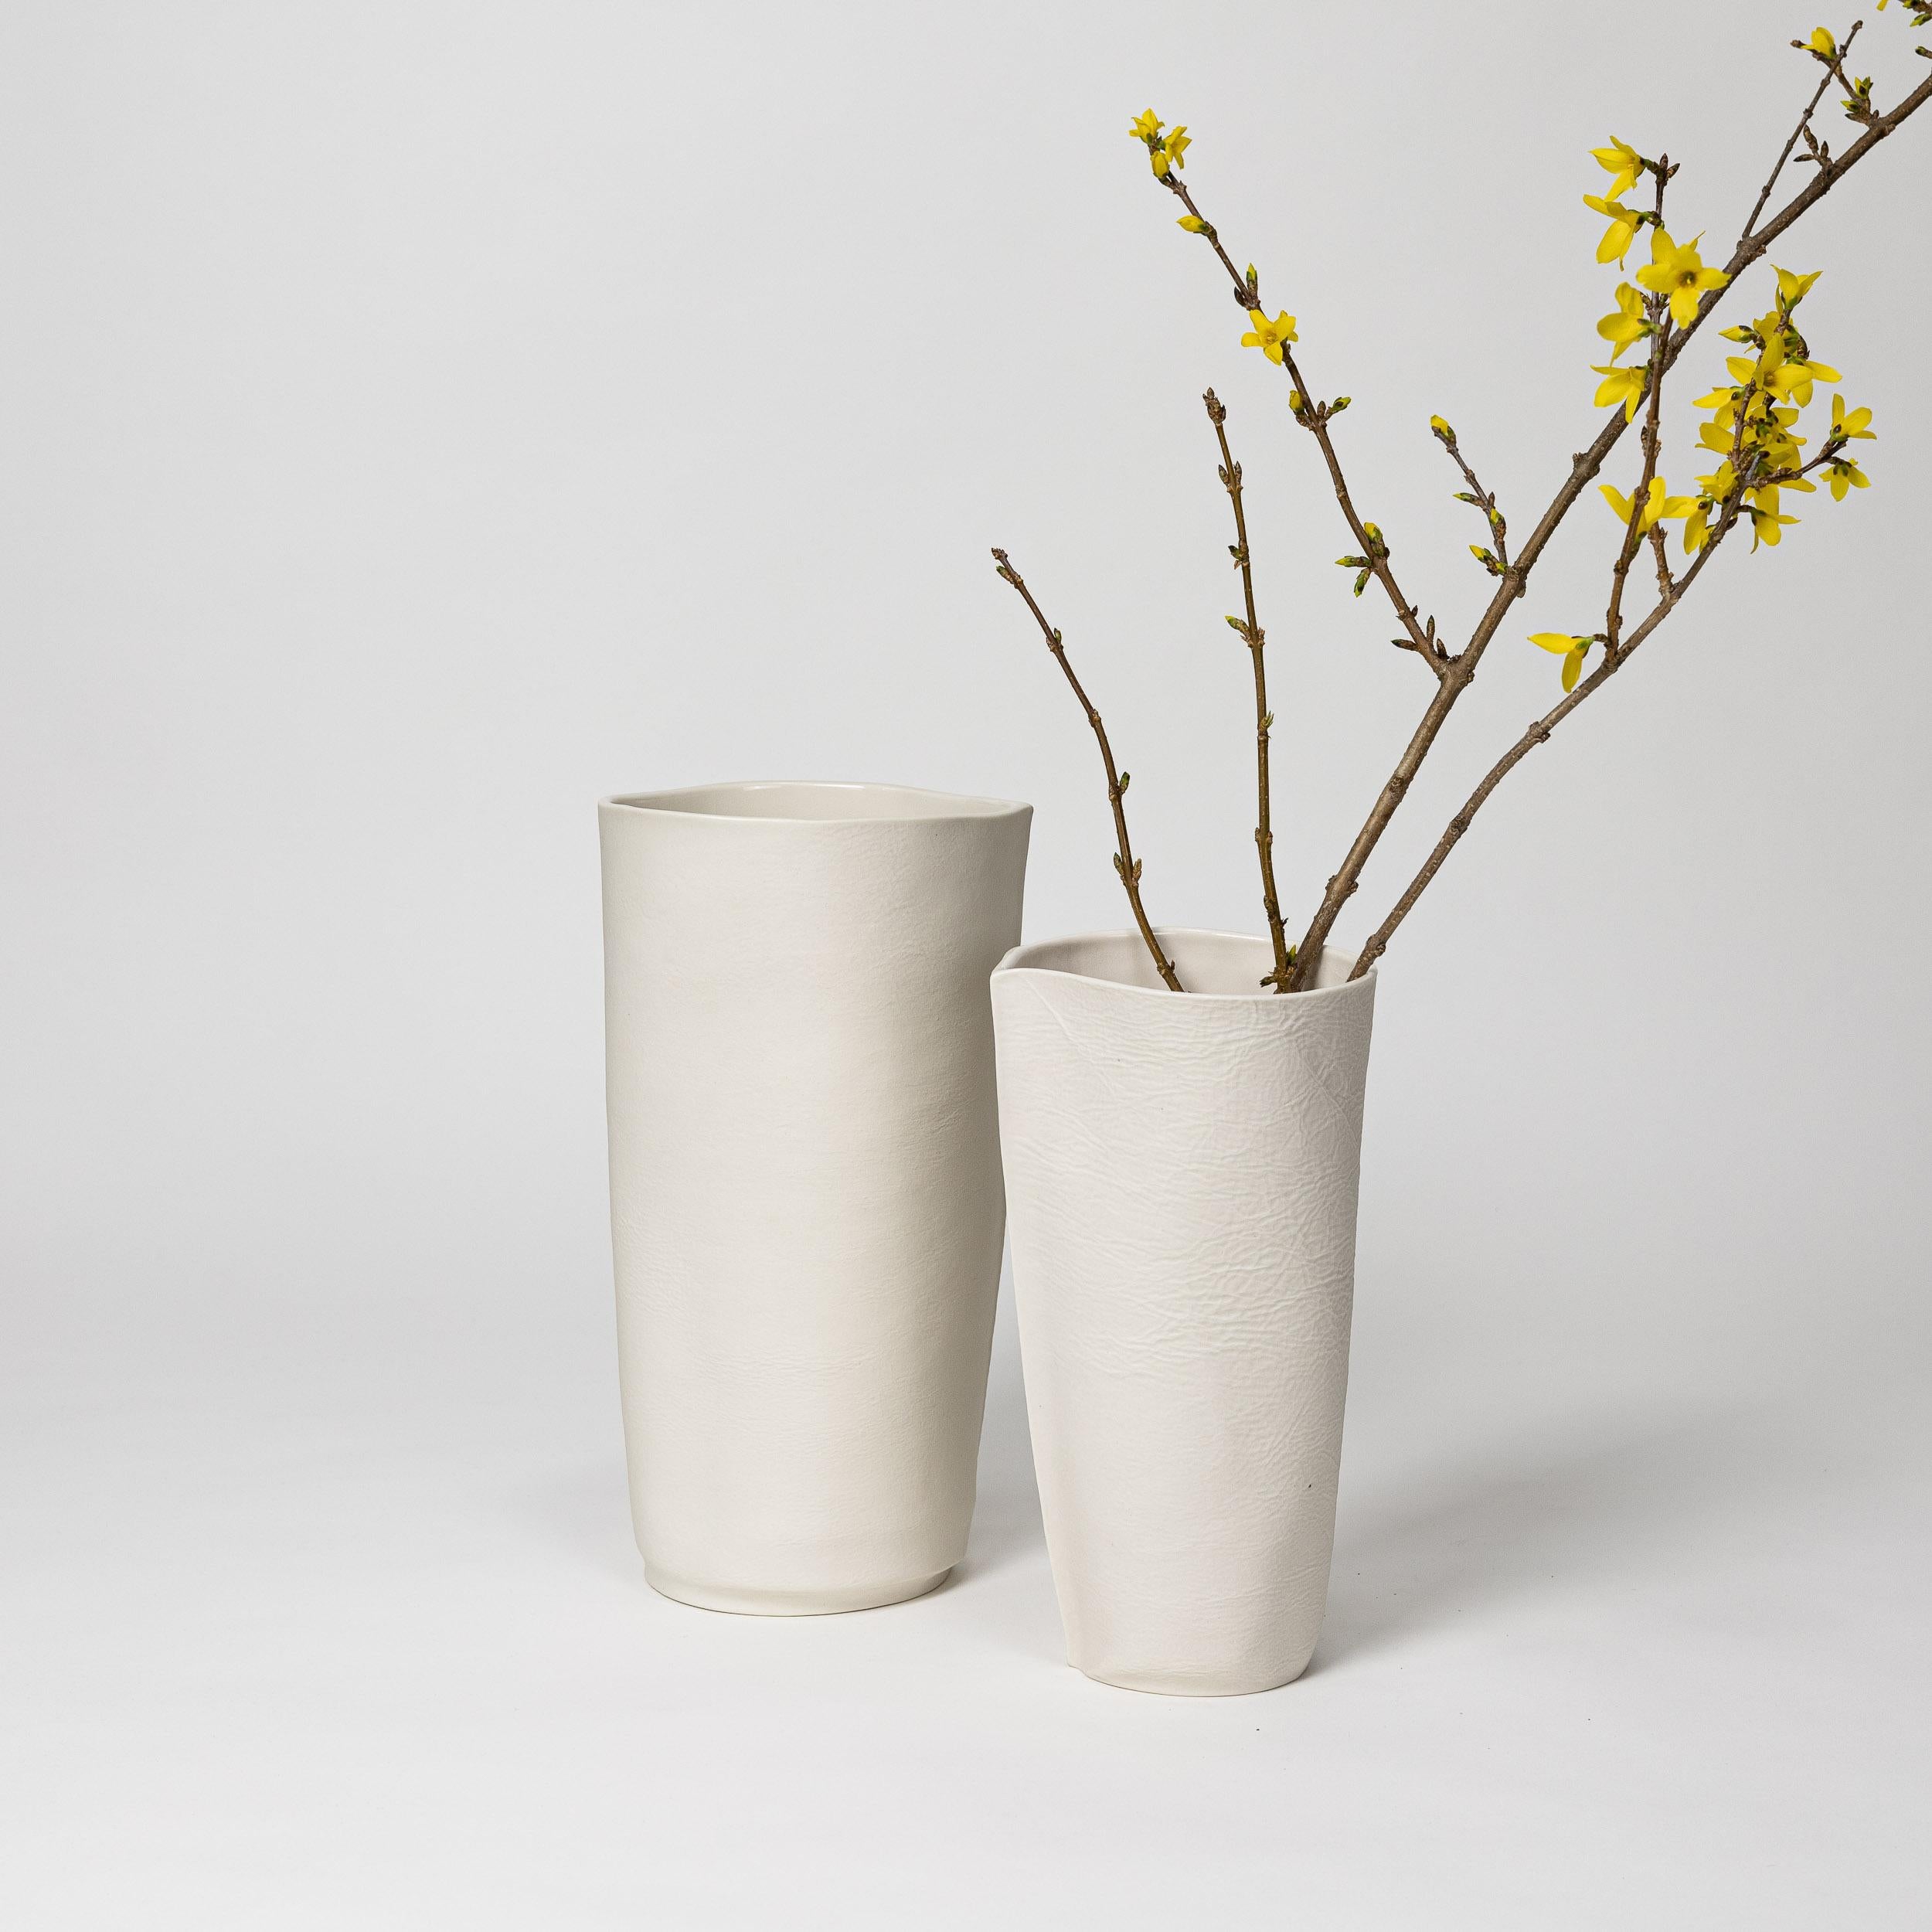 Pair of Kawa Vessels. 1 x 10inch height and 1 x 12 inch height.

Tactile and textured organic porcelain vase with an glossy glazed interior surface. Works well as a pair or individually. Great for larger bouquets or long branches.

10inch Vessel =